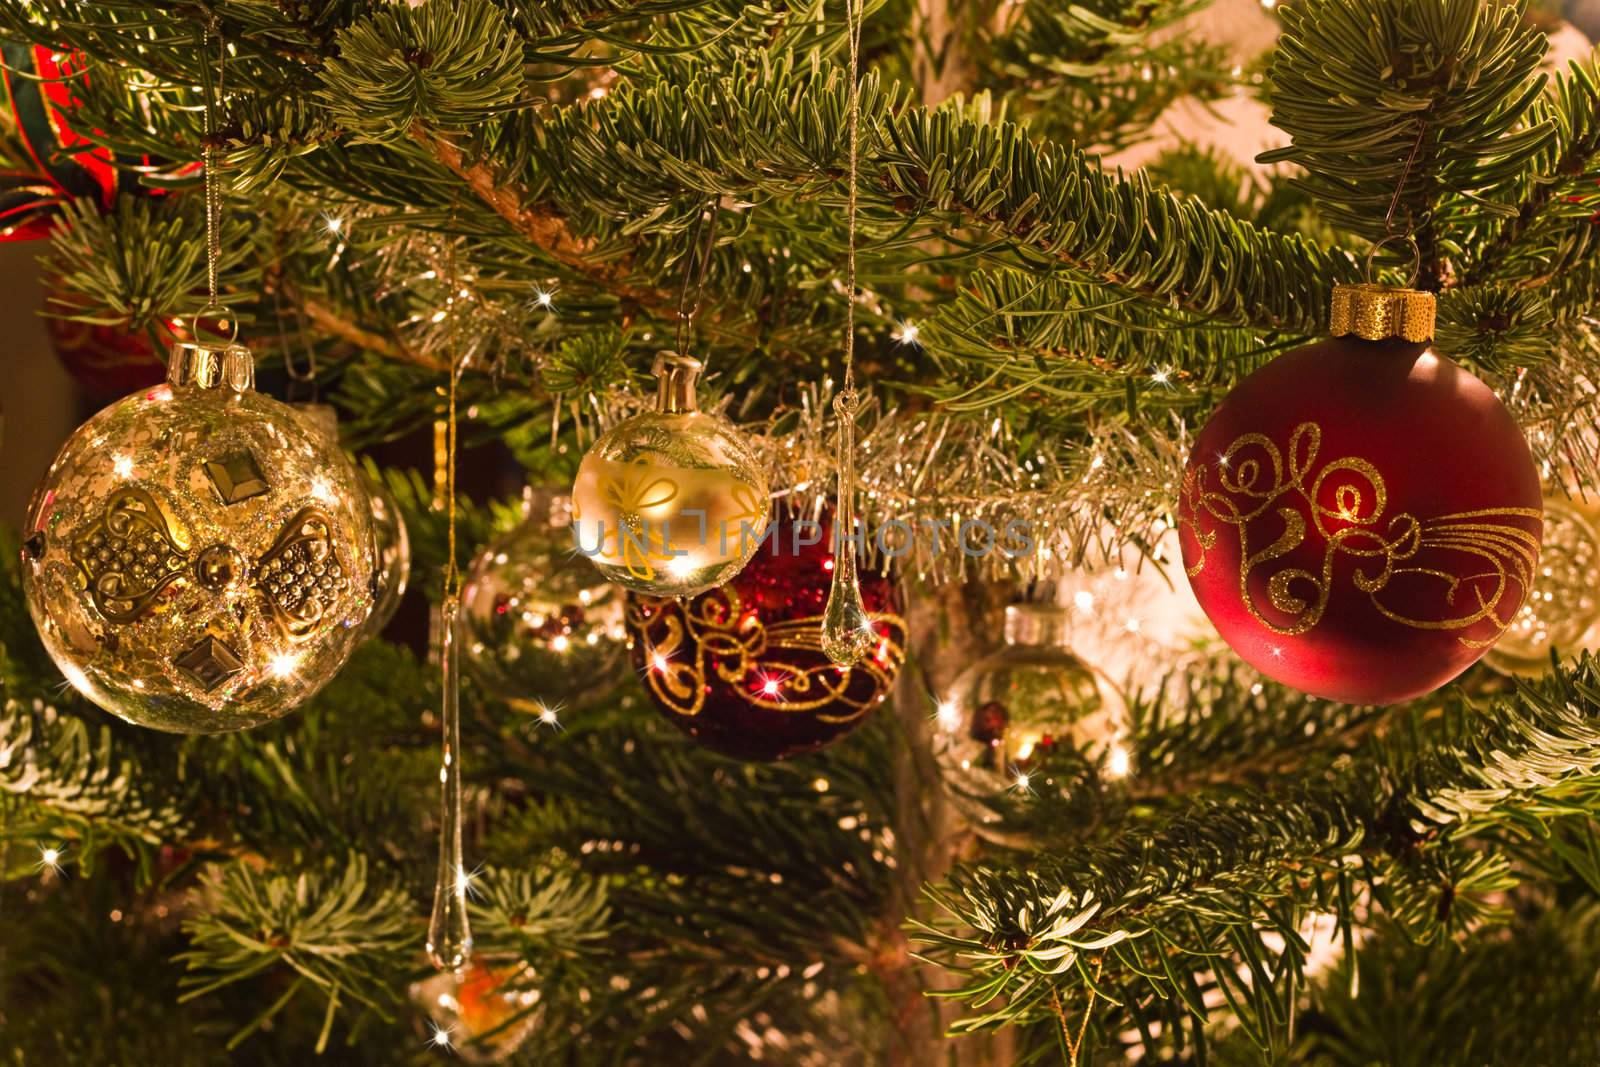 Decoration in christmas tree with balls and lights red and silver